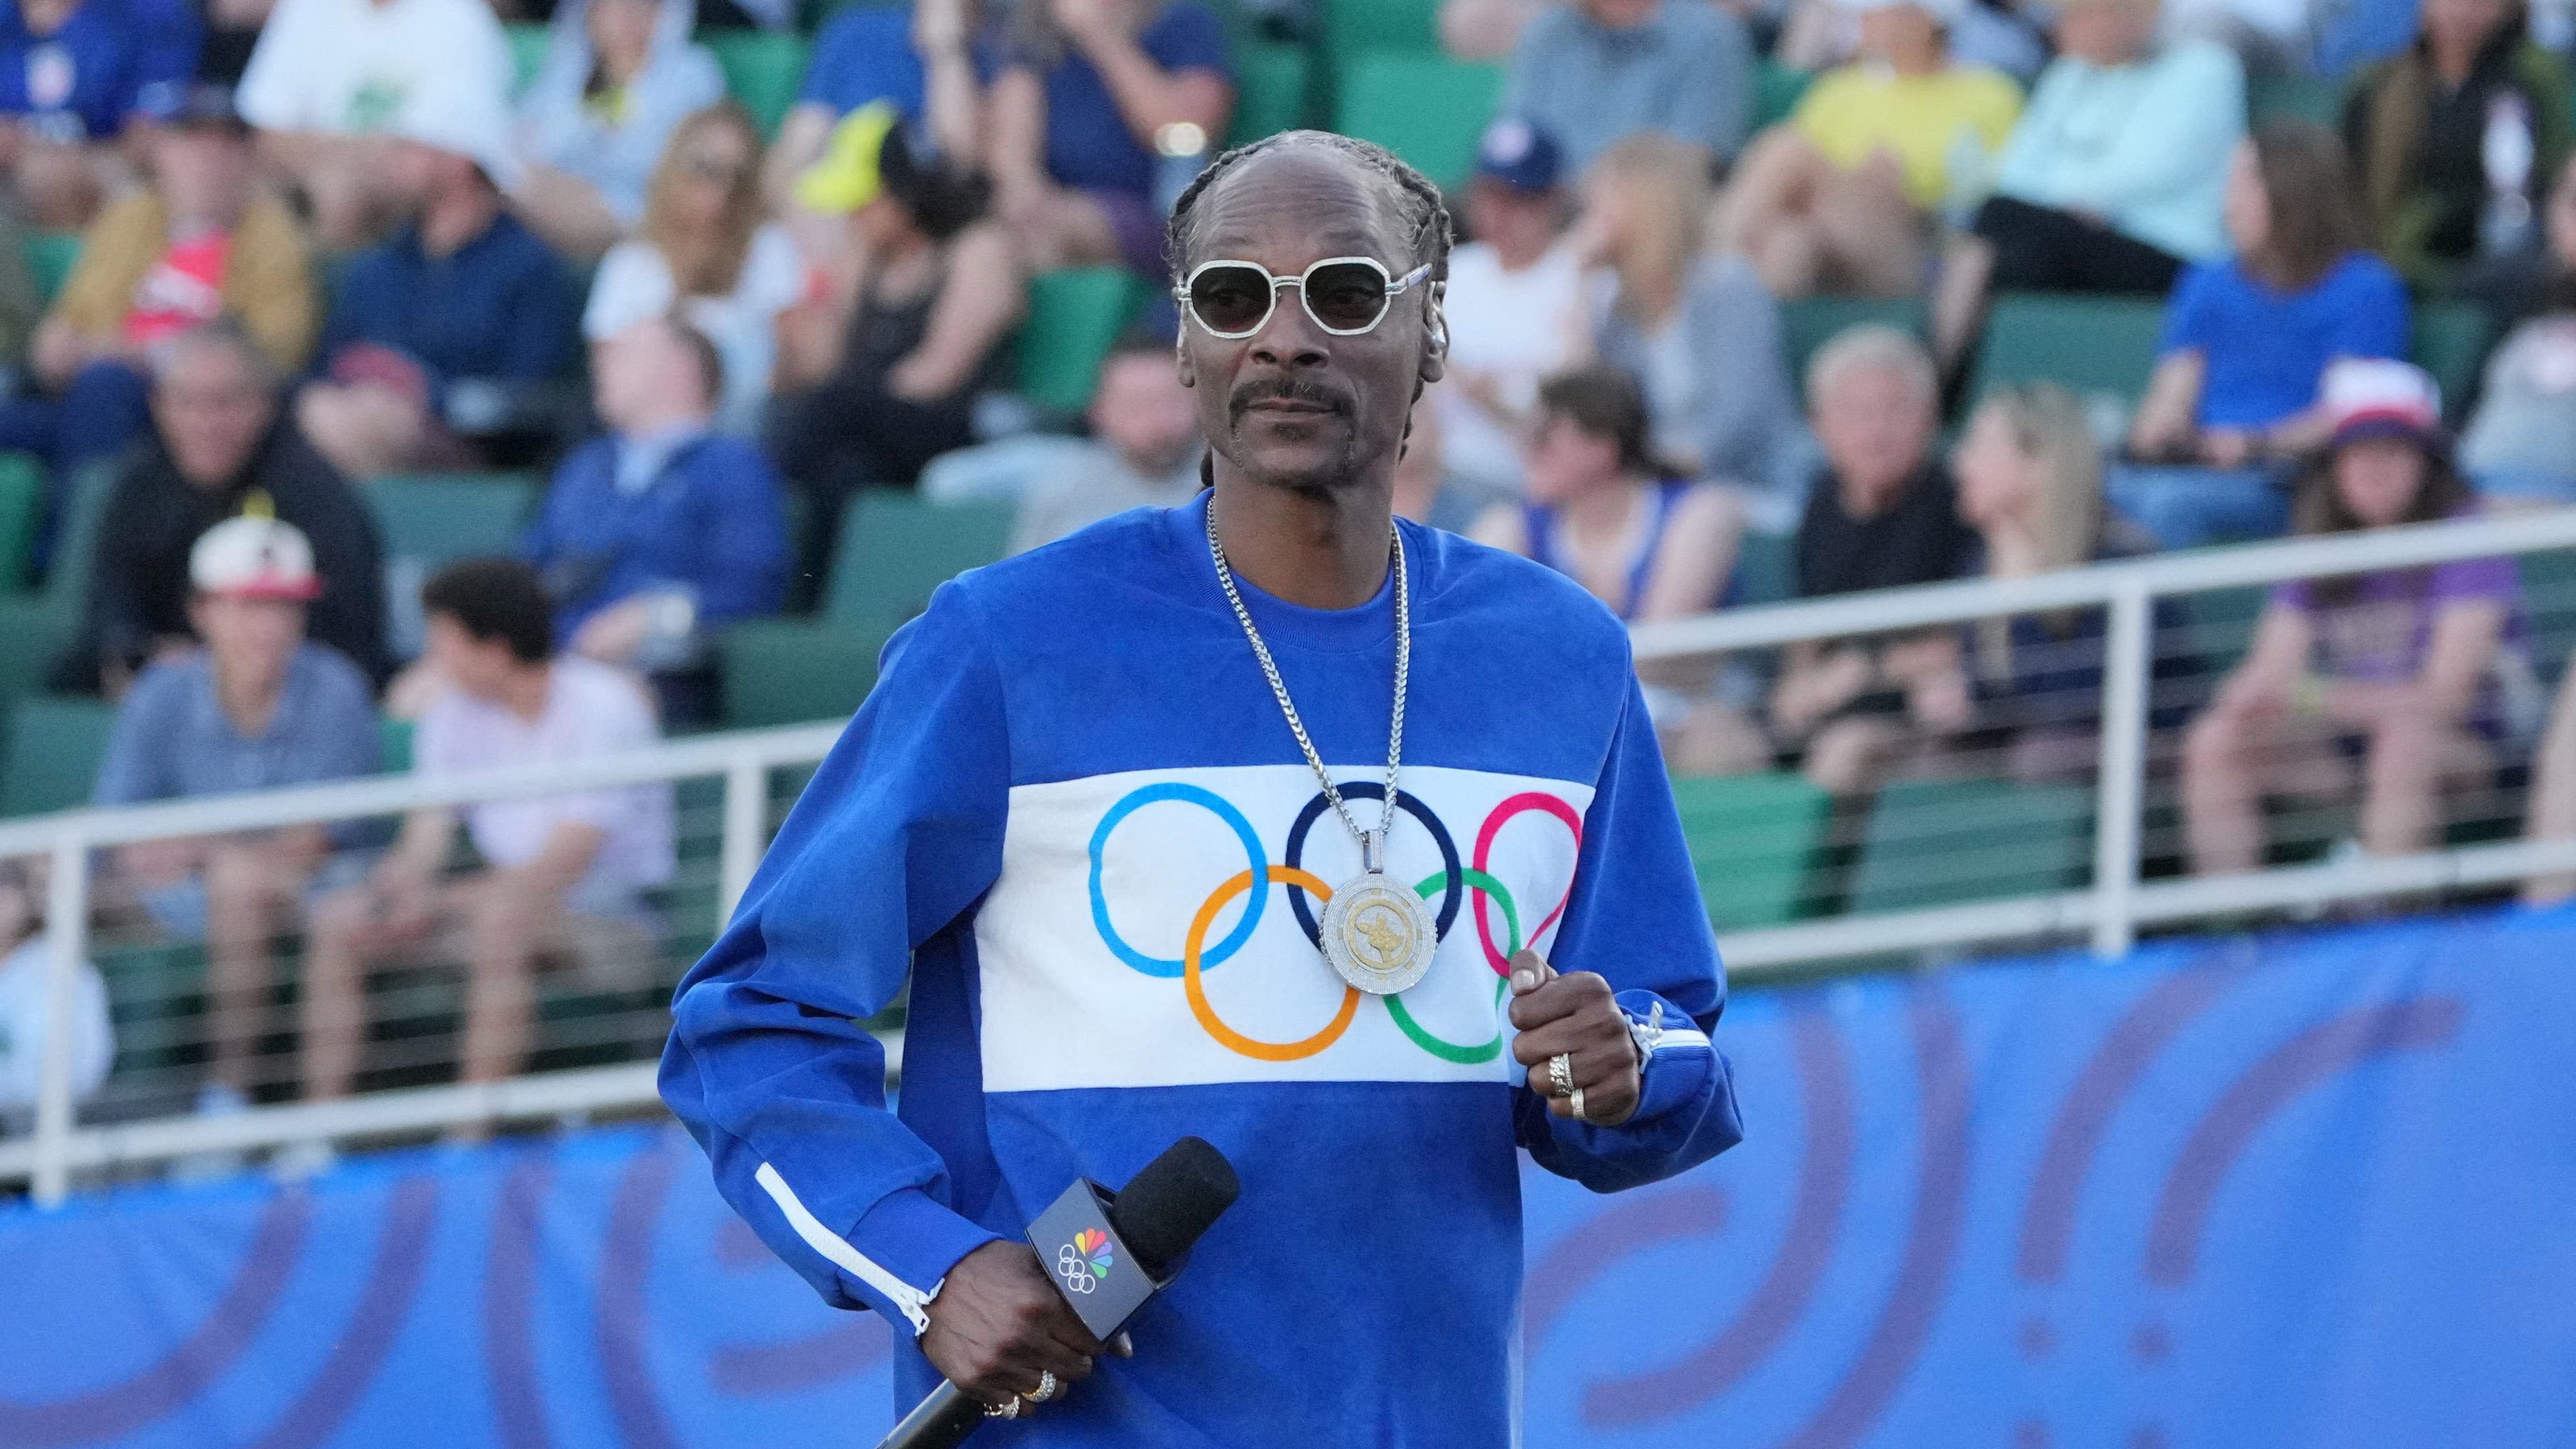 What to expect from Snoop Dogg on NBC's coverage of 2024 Paris Olympics